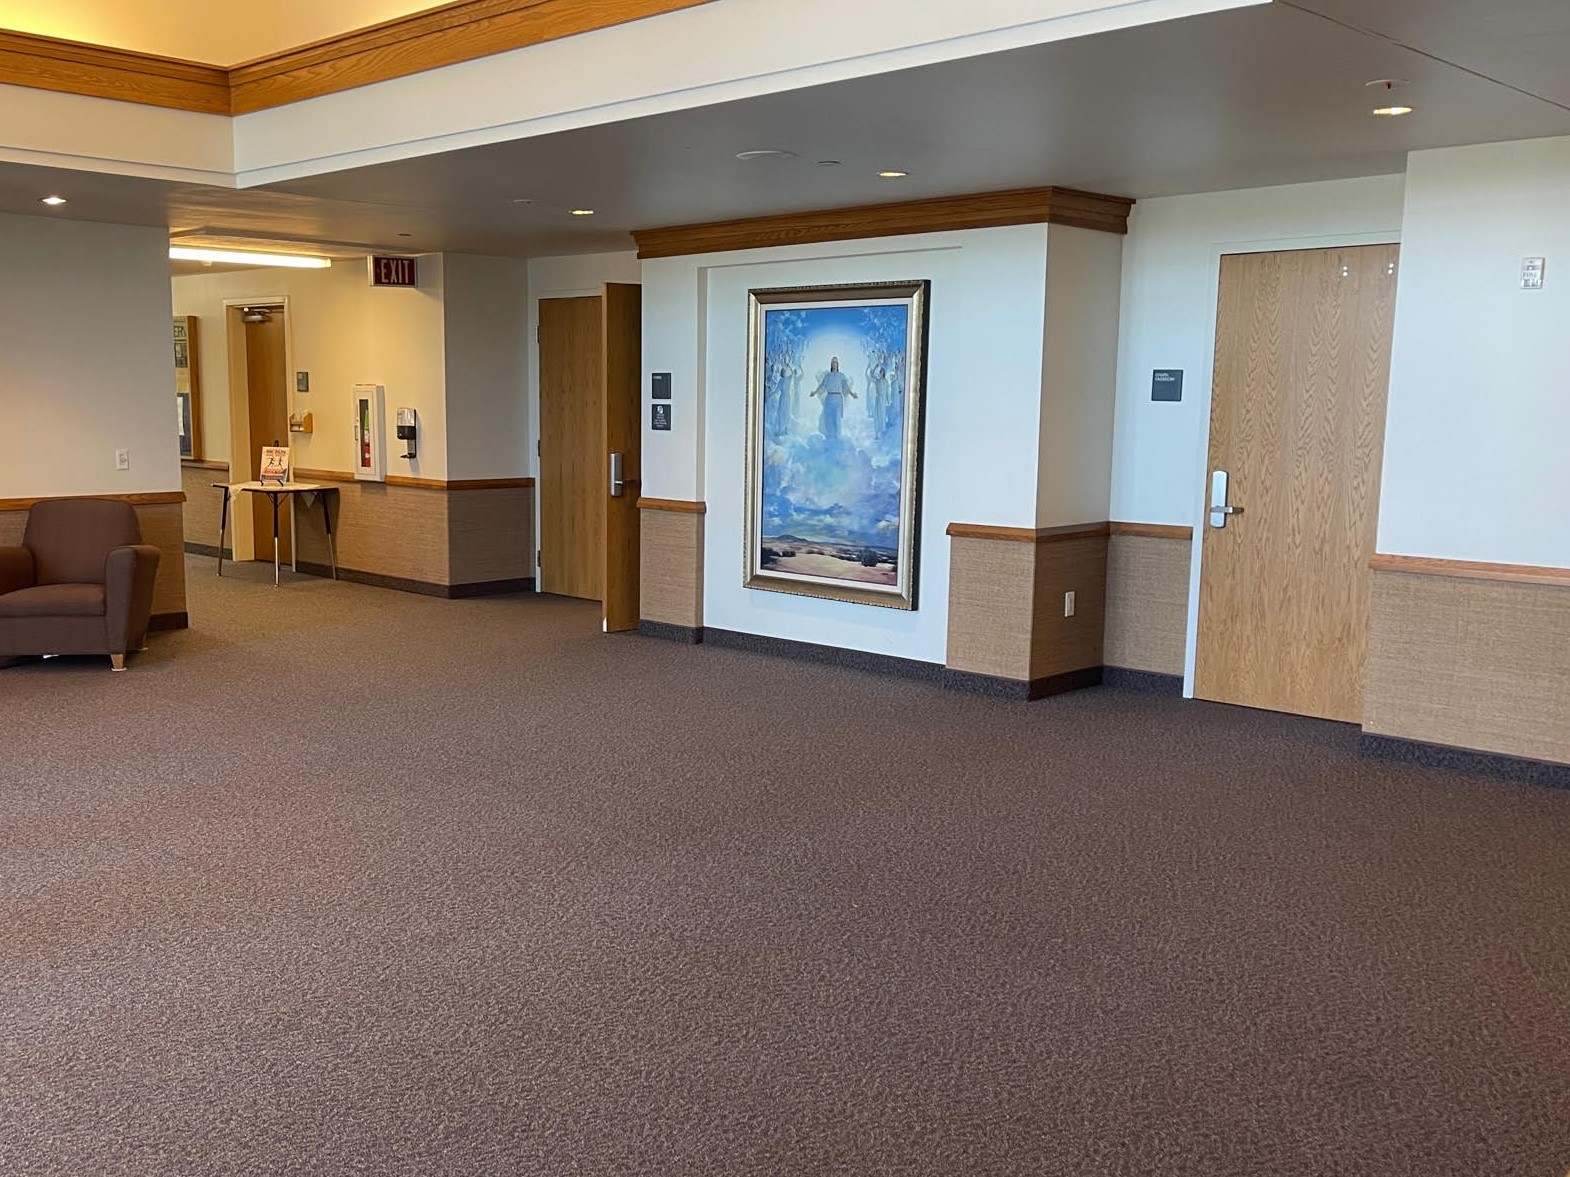 Main lobby of The Church of Jesus Christ of Latter-day Saints at 5401 Westwind Way, with a painting of Jesus Christ on the wall.